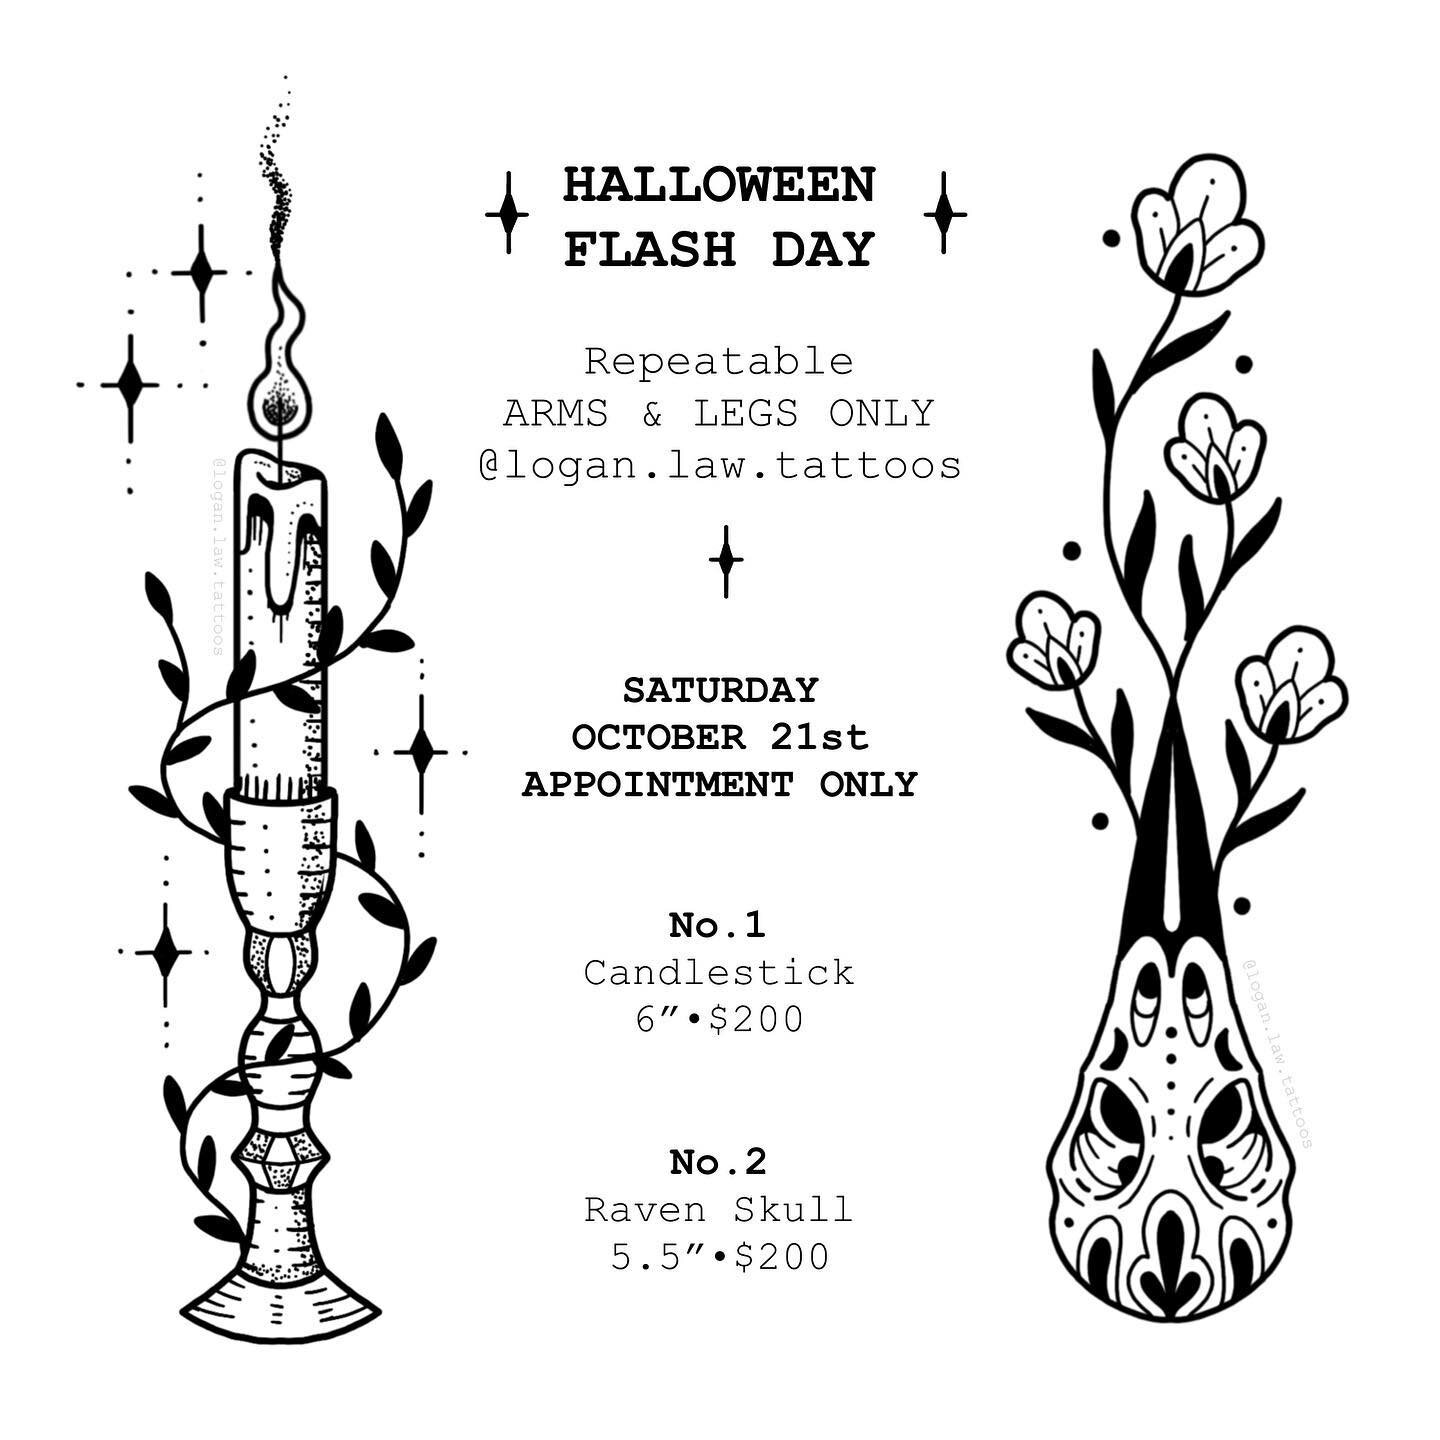 ✶ Halloween Flash Day ✶
**Edit: fully booked** Mikki, Hiri and I will be doing a flash event Saturday October 21st! I will be booking these tomorrow on my website at 12pm MDT ☾

⊹ $200
⊹ Sizing as listed
⊹ Arms &amp; legs only
⊹ $50 deposit to book
⊹